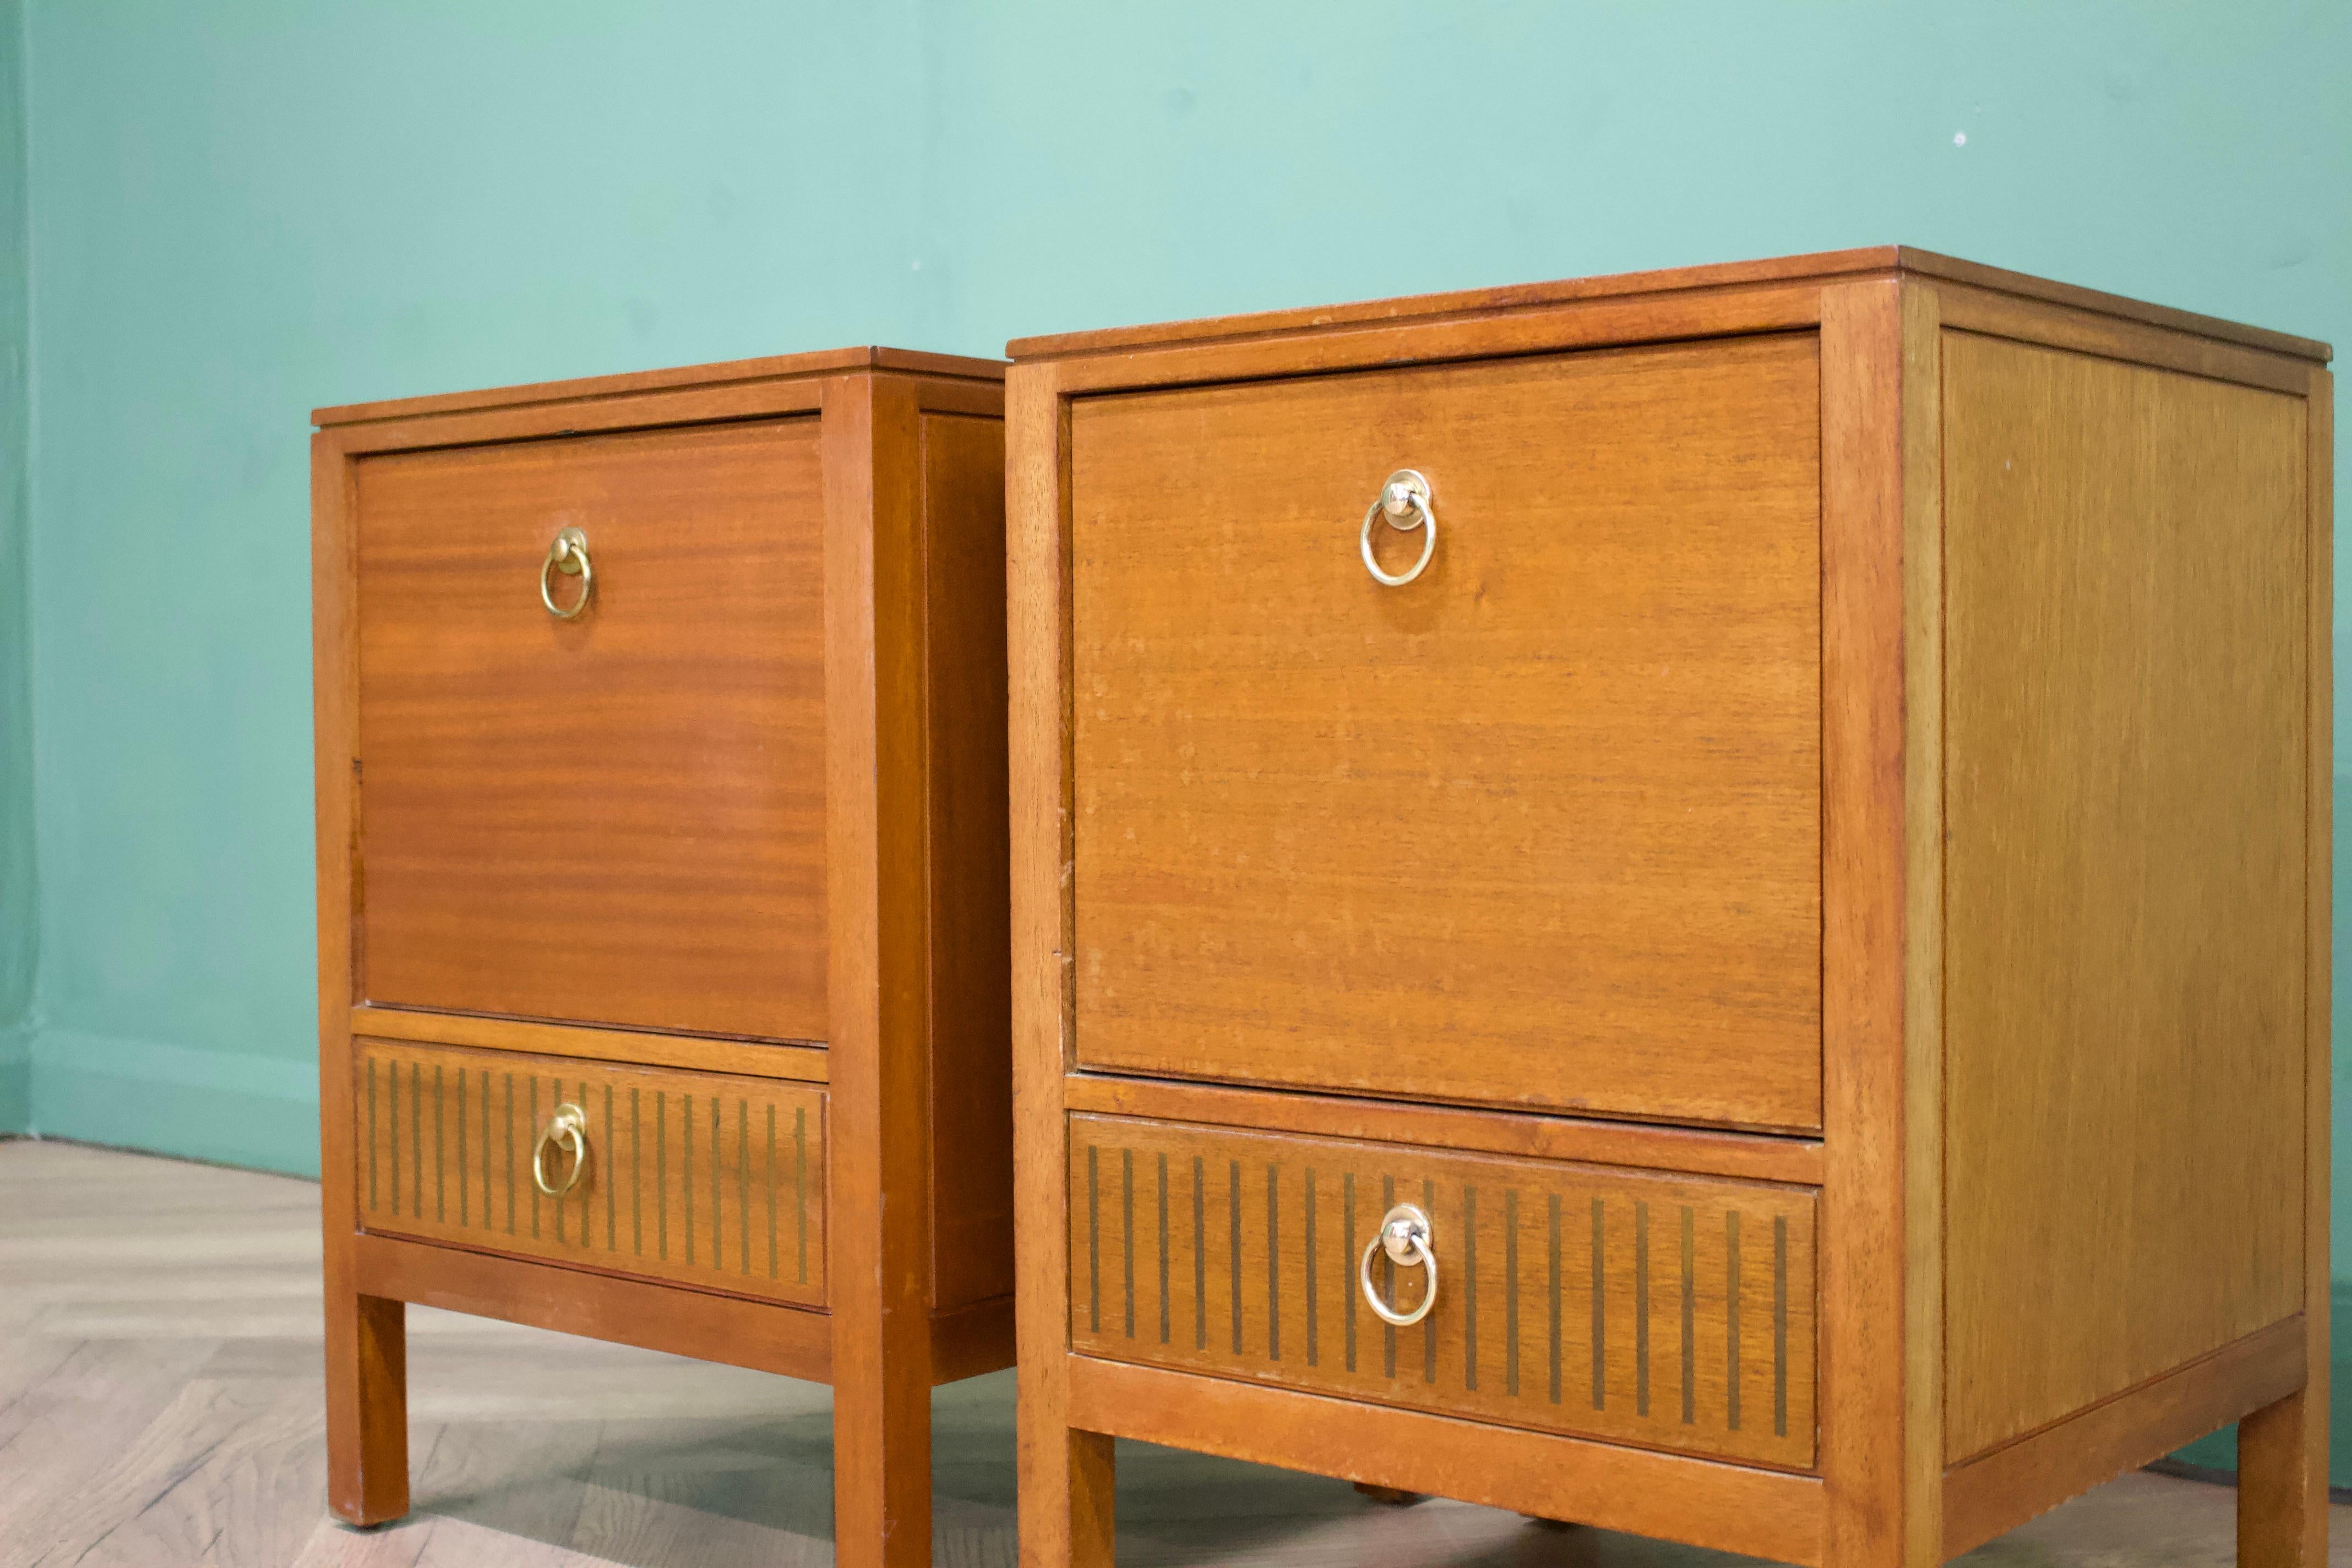 British Mid-Century Teak Pair Bedside Tables from Loughborough, 1950s